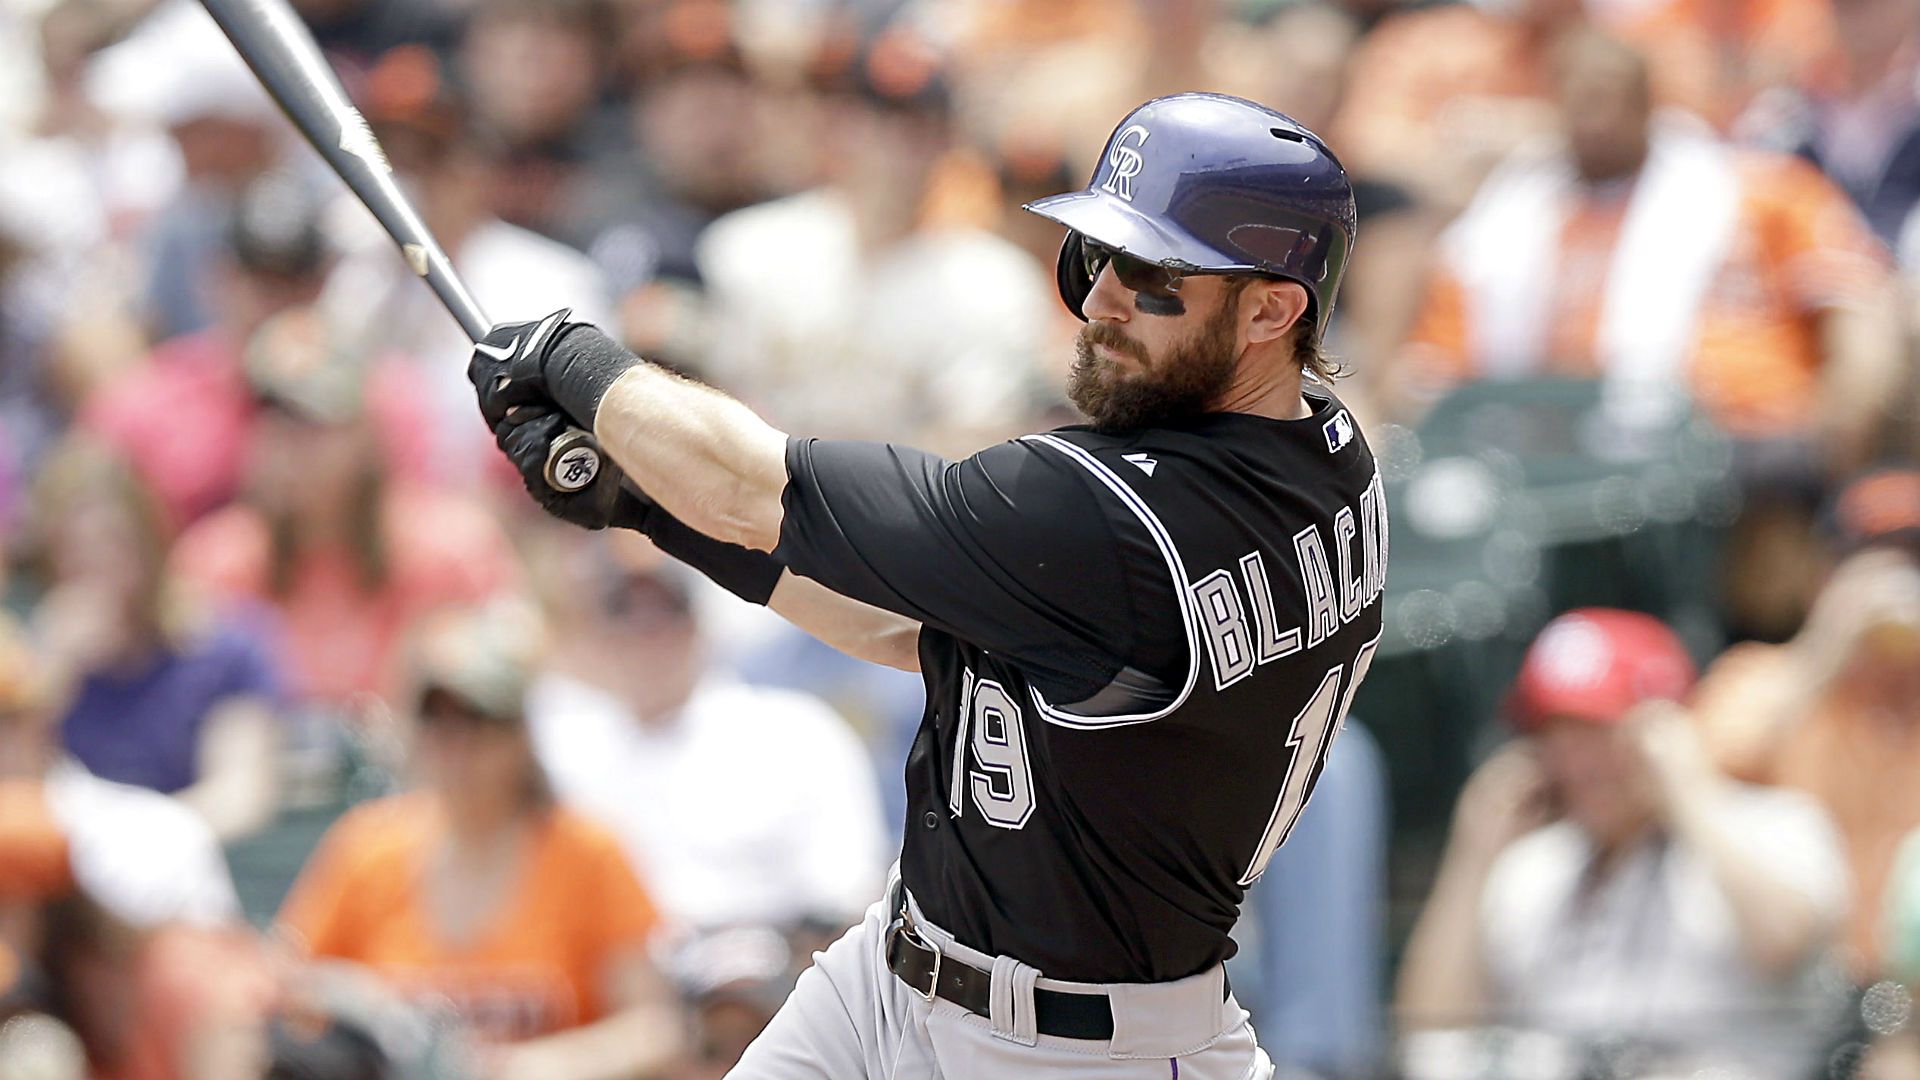 Charlie Blackmon helps Rockies stay in playoff picture